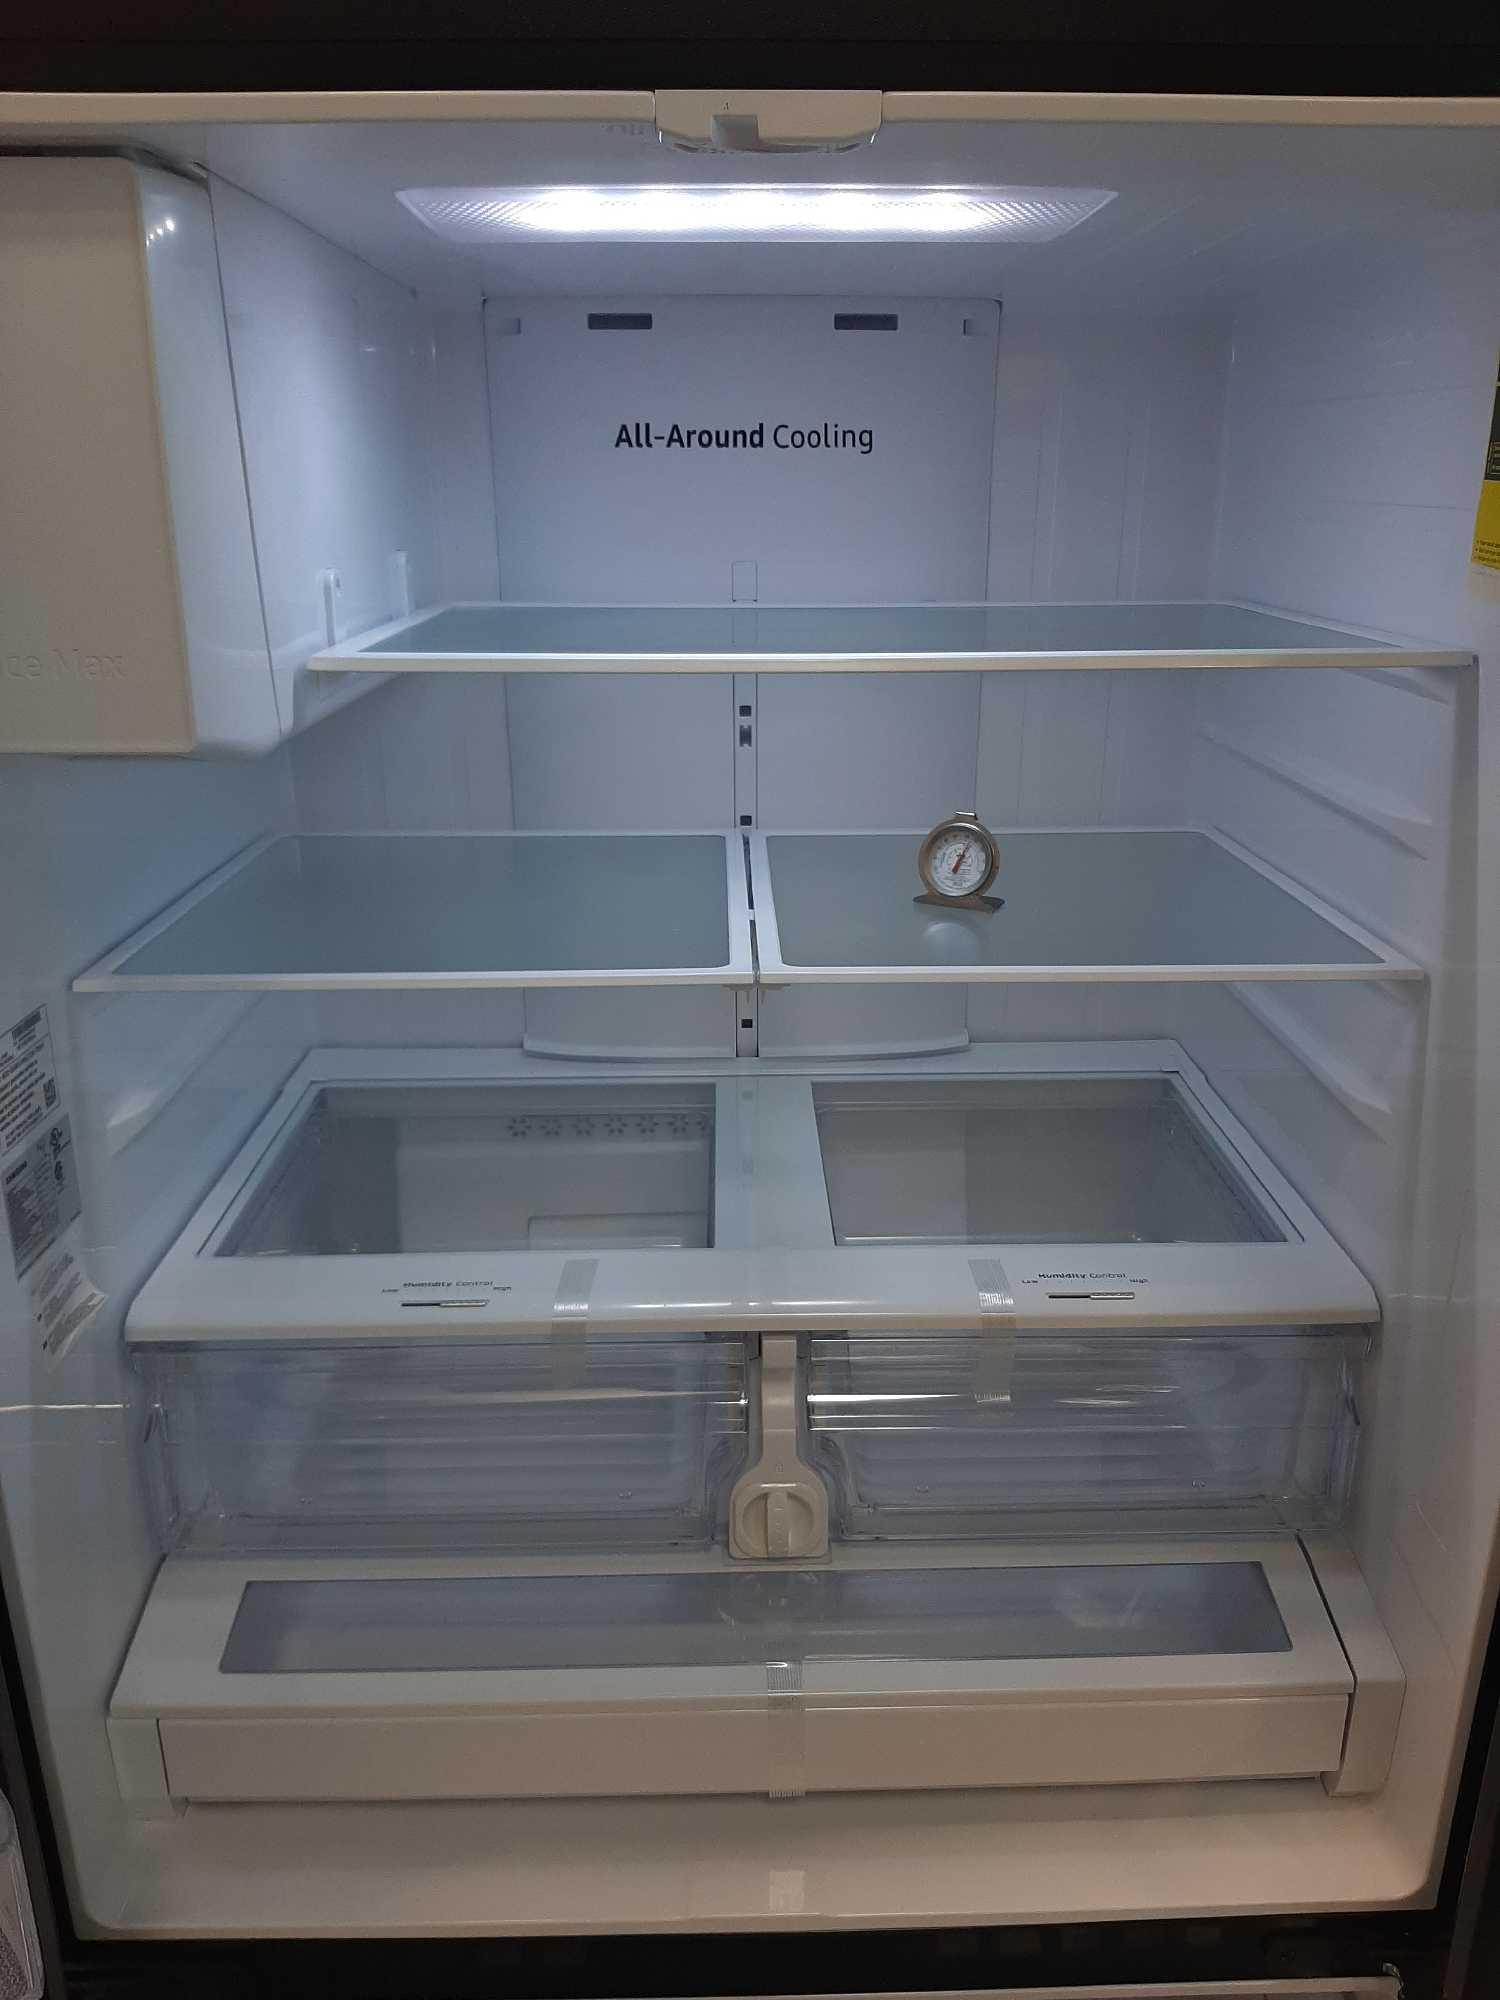 Samsung 26.5 cu. ft. Large Capacity 3 Door French Door Refrigerator*COLD*PREVIOUSLY INSTALLED